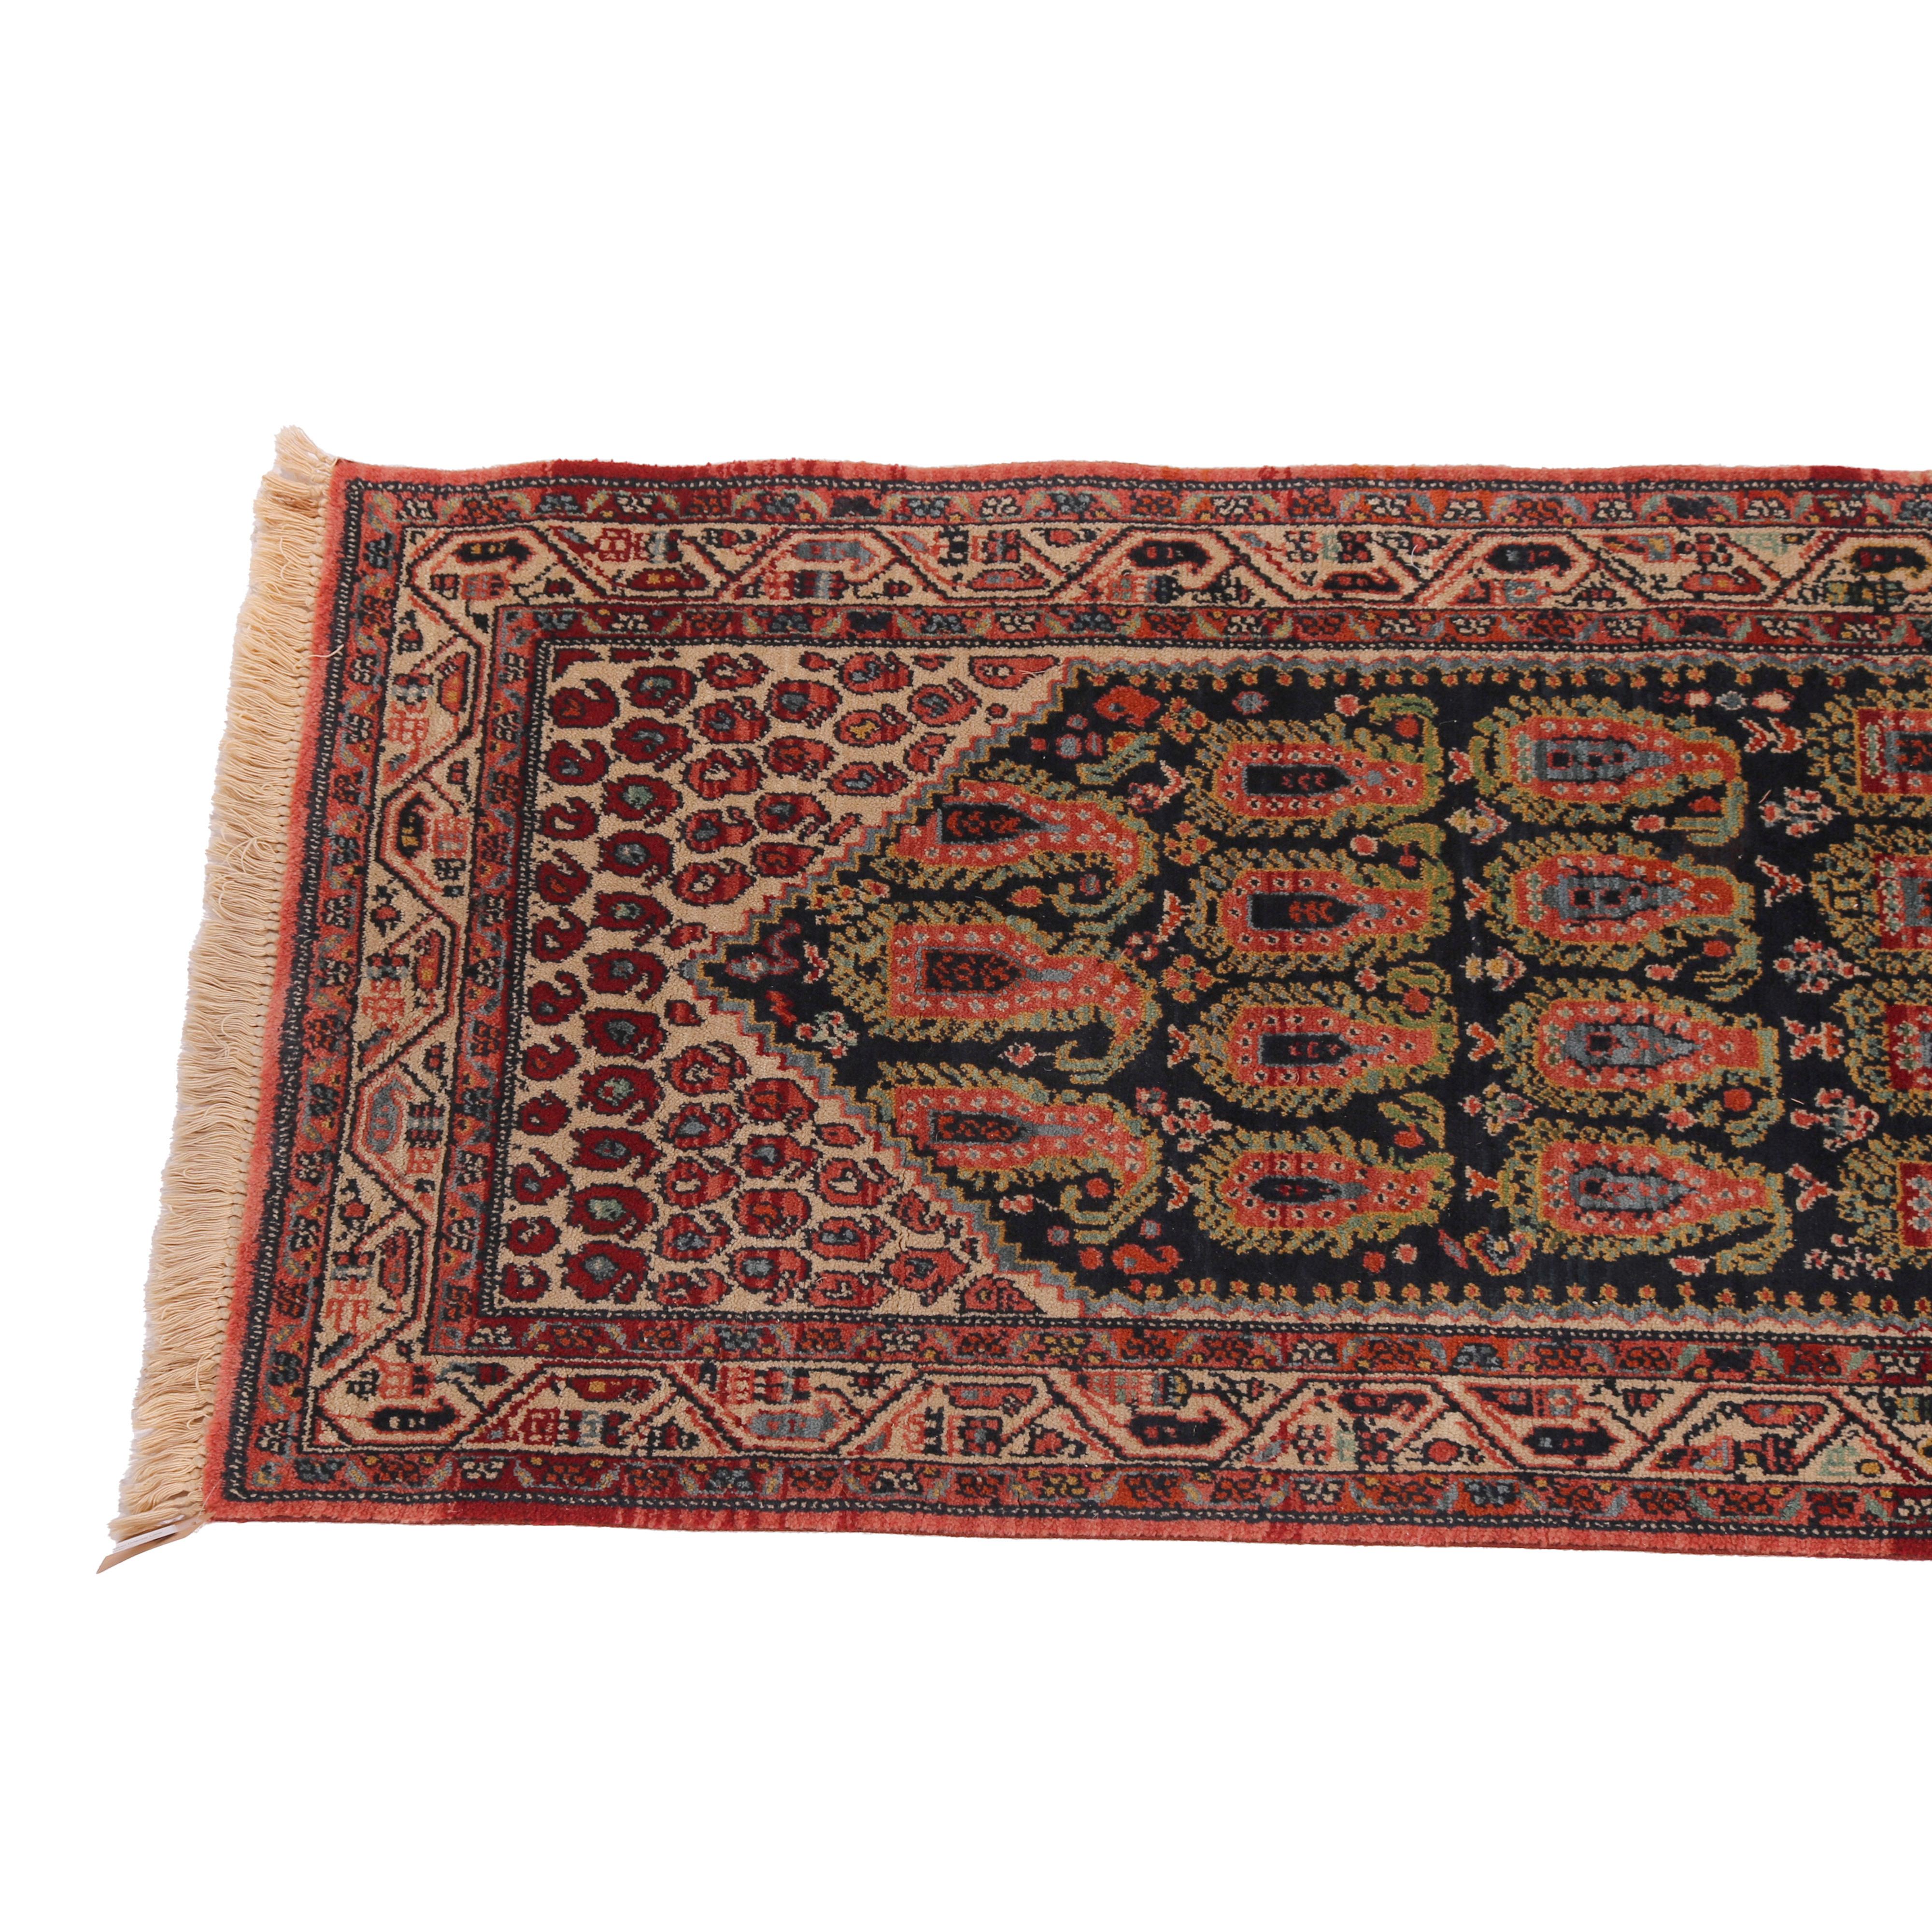 Oriental Long Runner with Repeating Boteh Pattern Circa 1950

Measures - 133.5